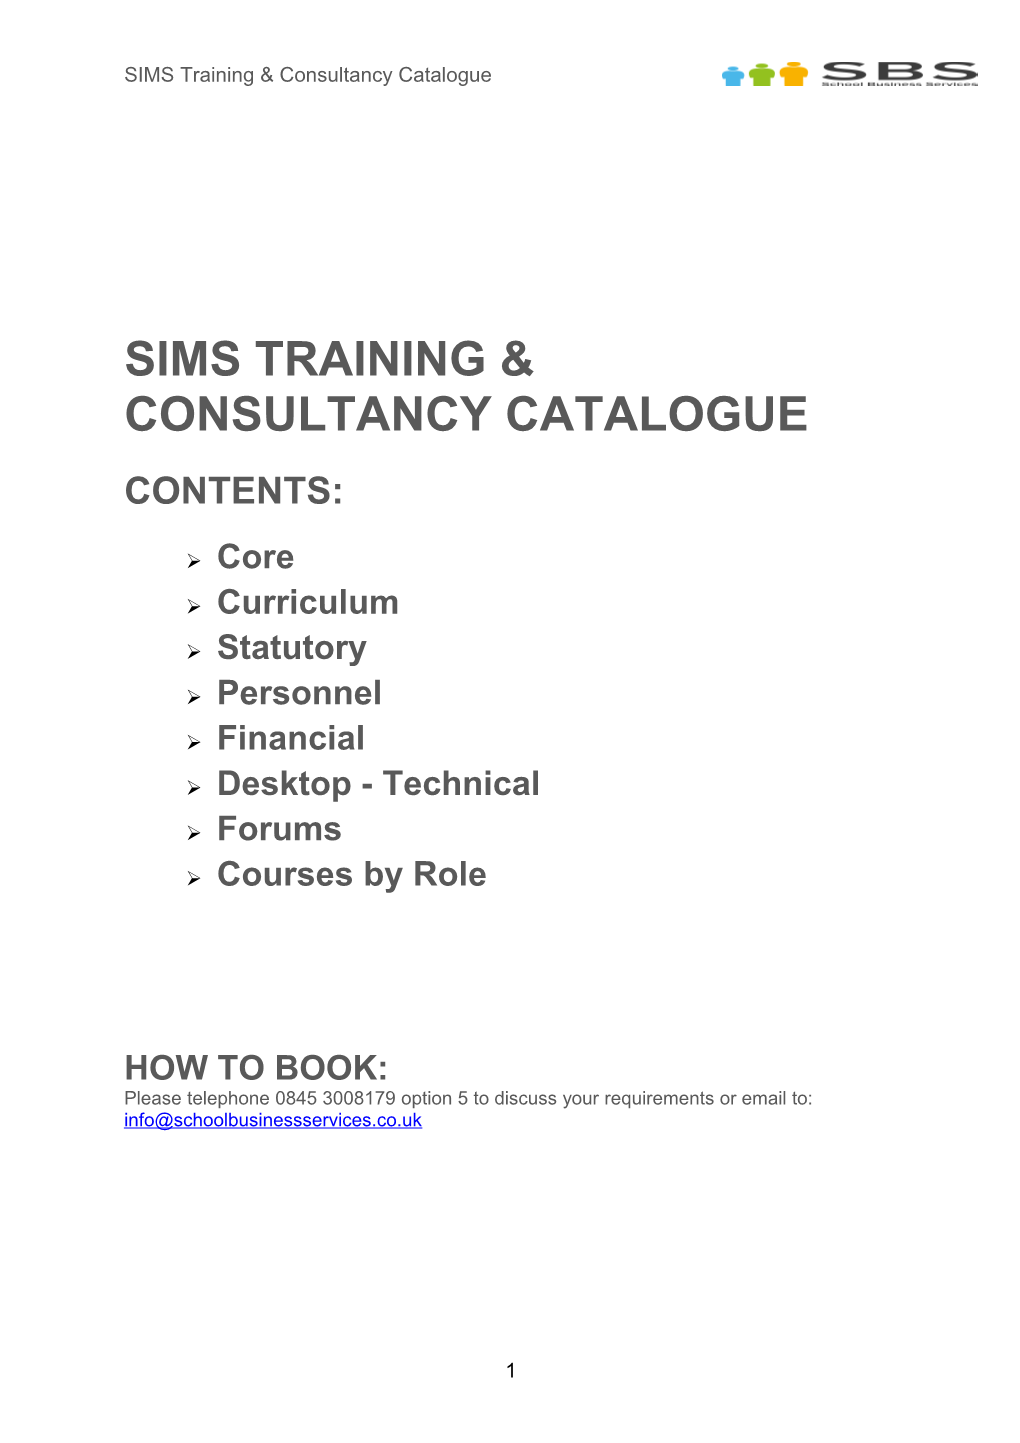 Sims Training & Consultancy Catalogue